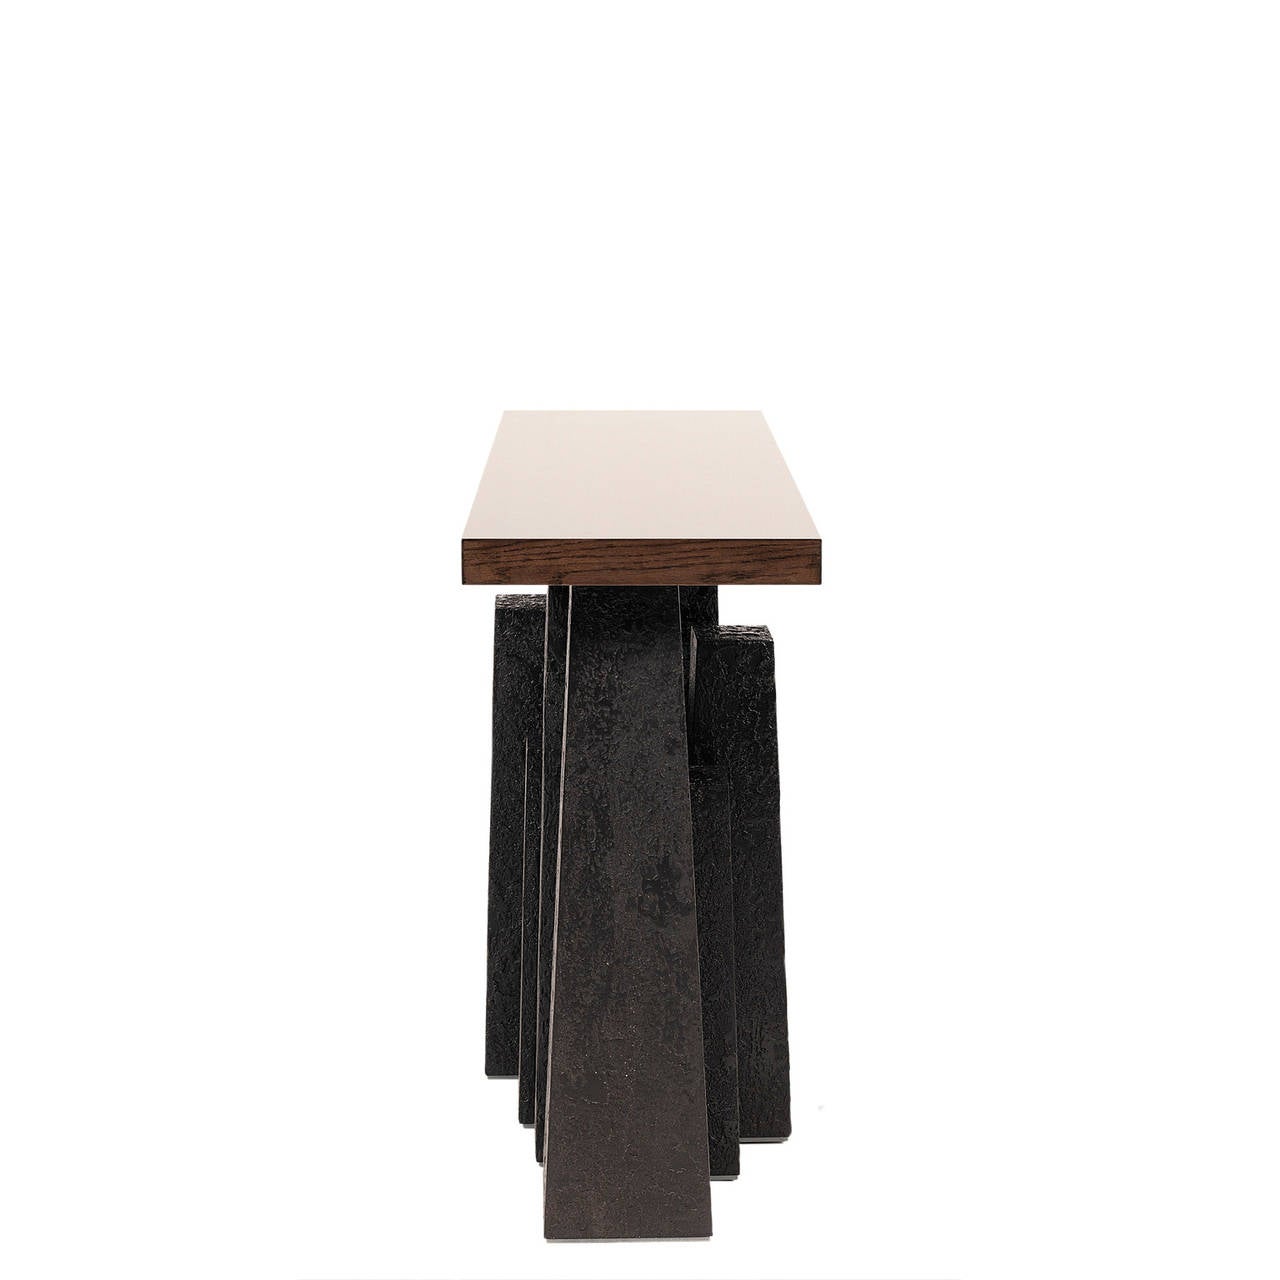 British Housesteads Contemporary Style Console Featuring a Unique Luna Finish